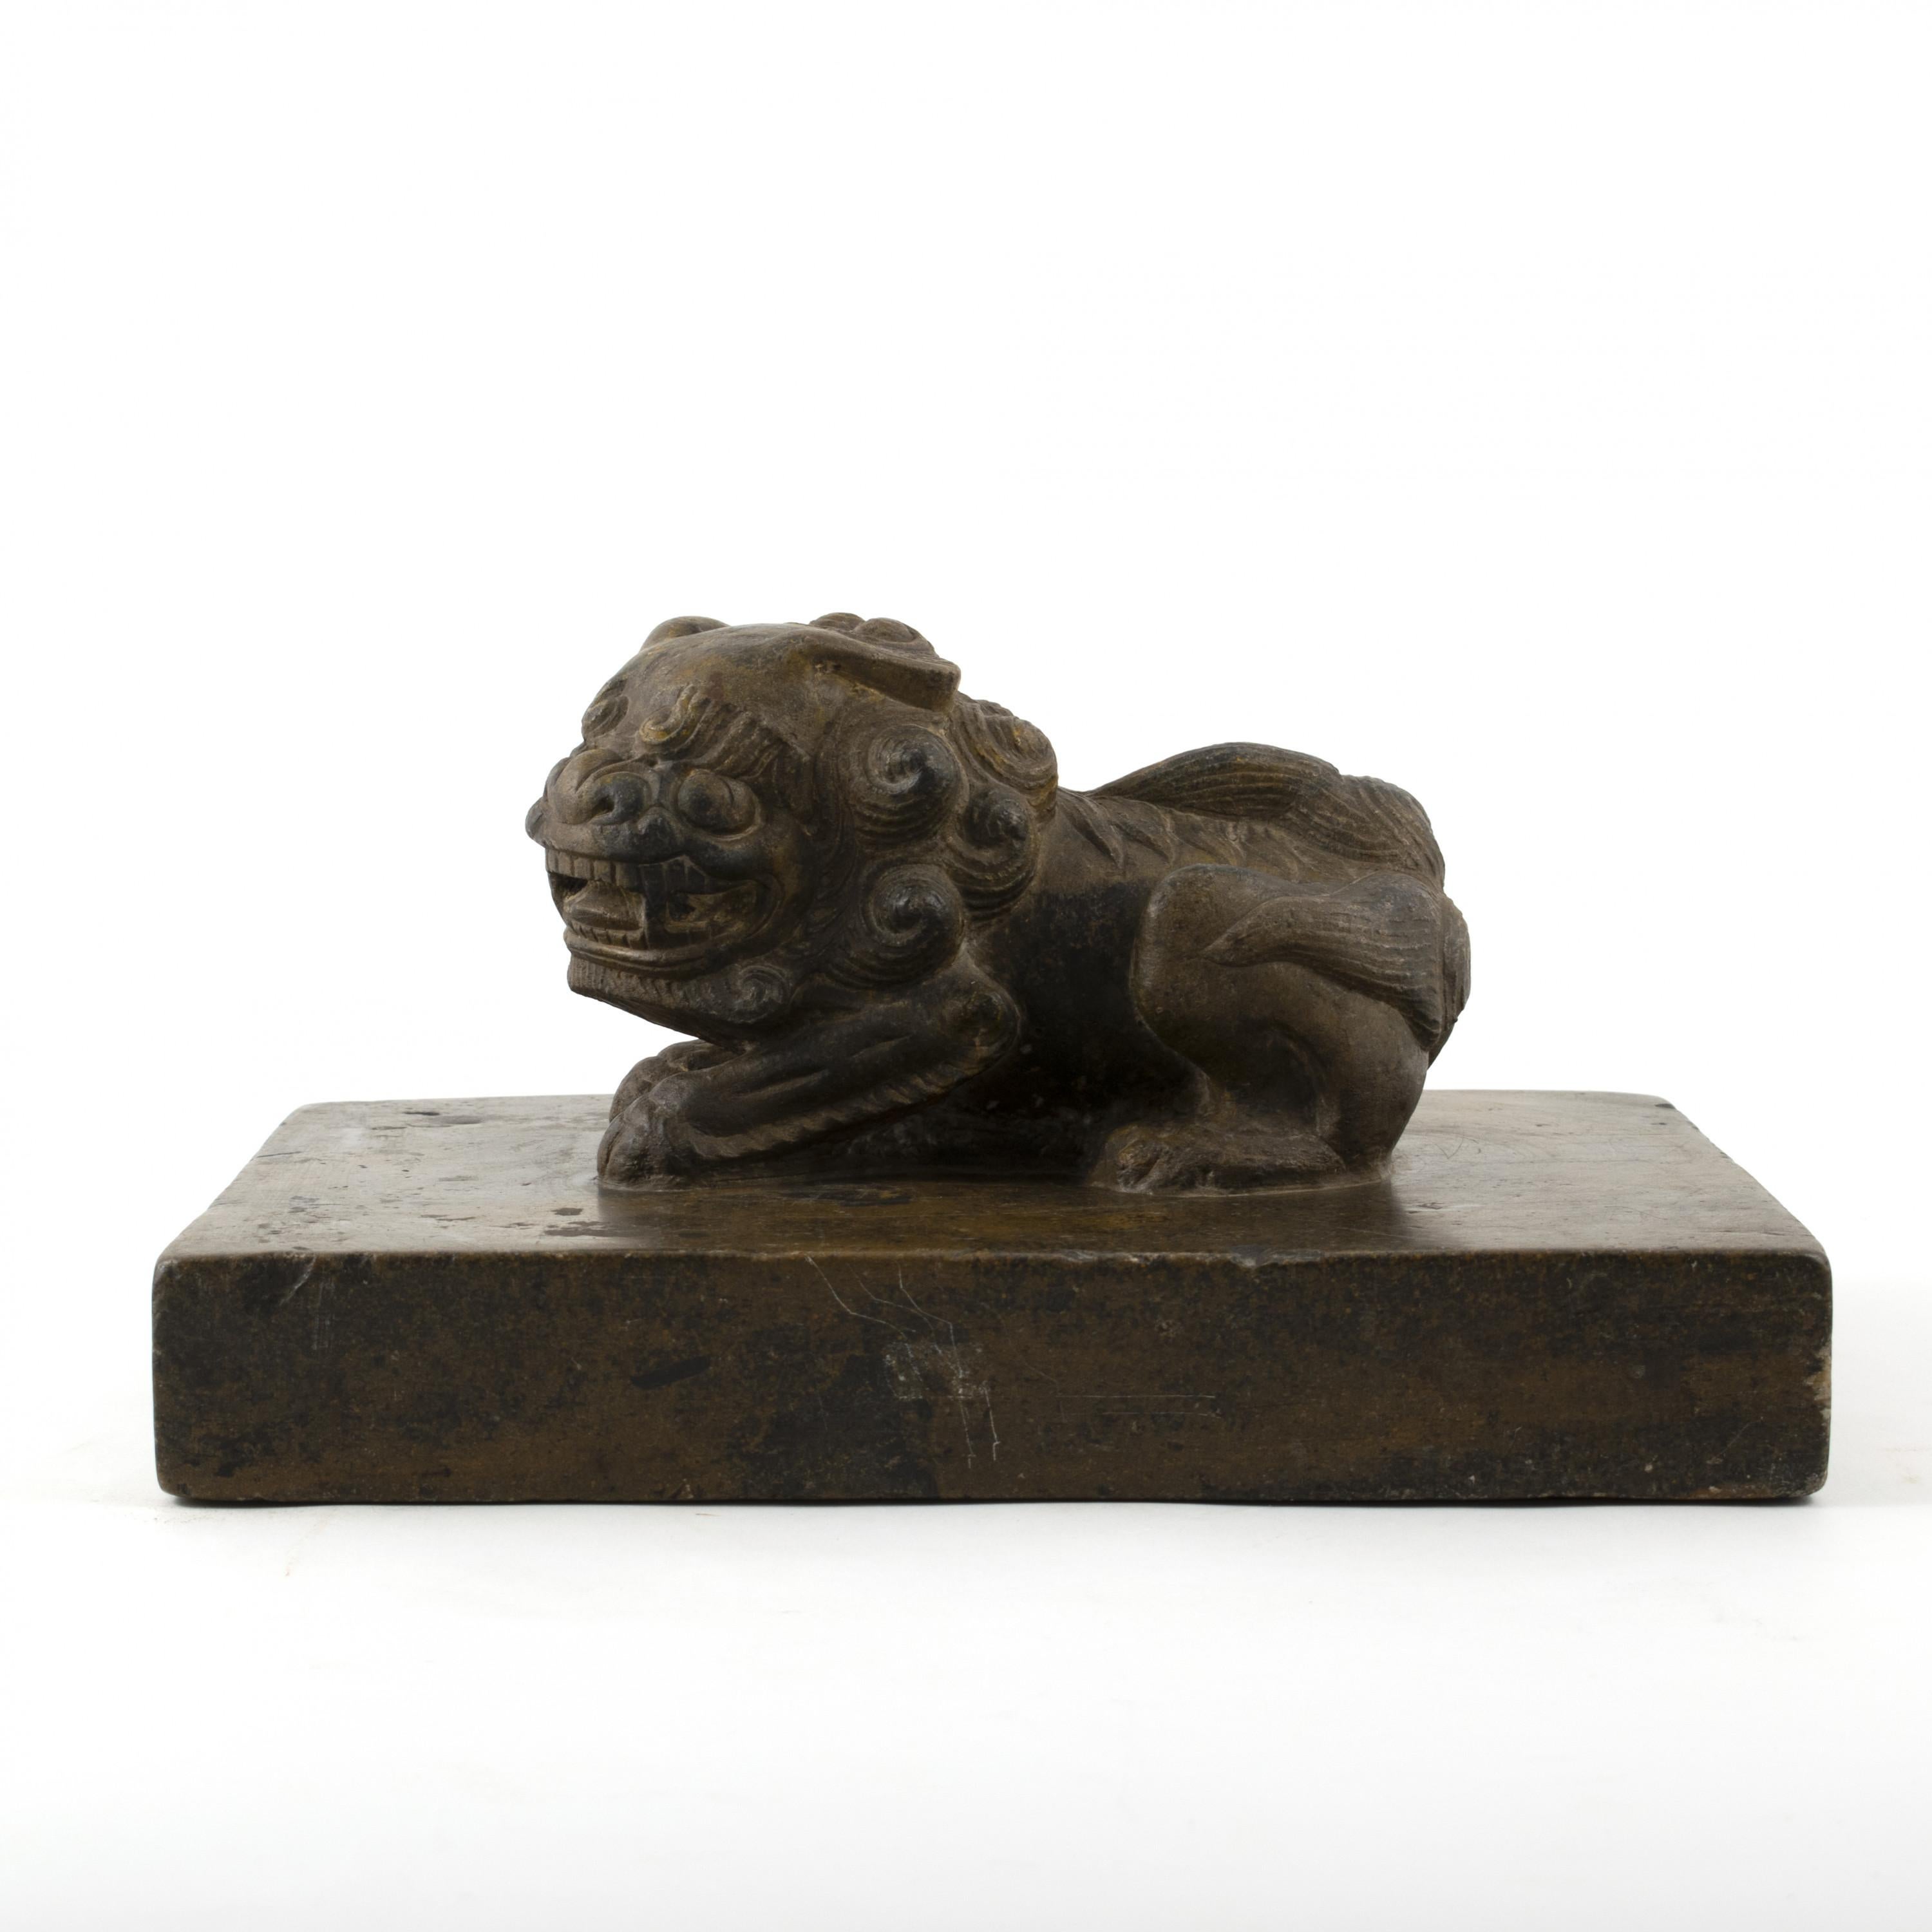 18th-19th century Chinese carved stone sculpture depicting a Foo Dog.
Carved from a solid piece of stone, this weight was originally used by a Shoemaker. After layers of fabrics are Binder and glued, weights like these were put on top to make the